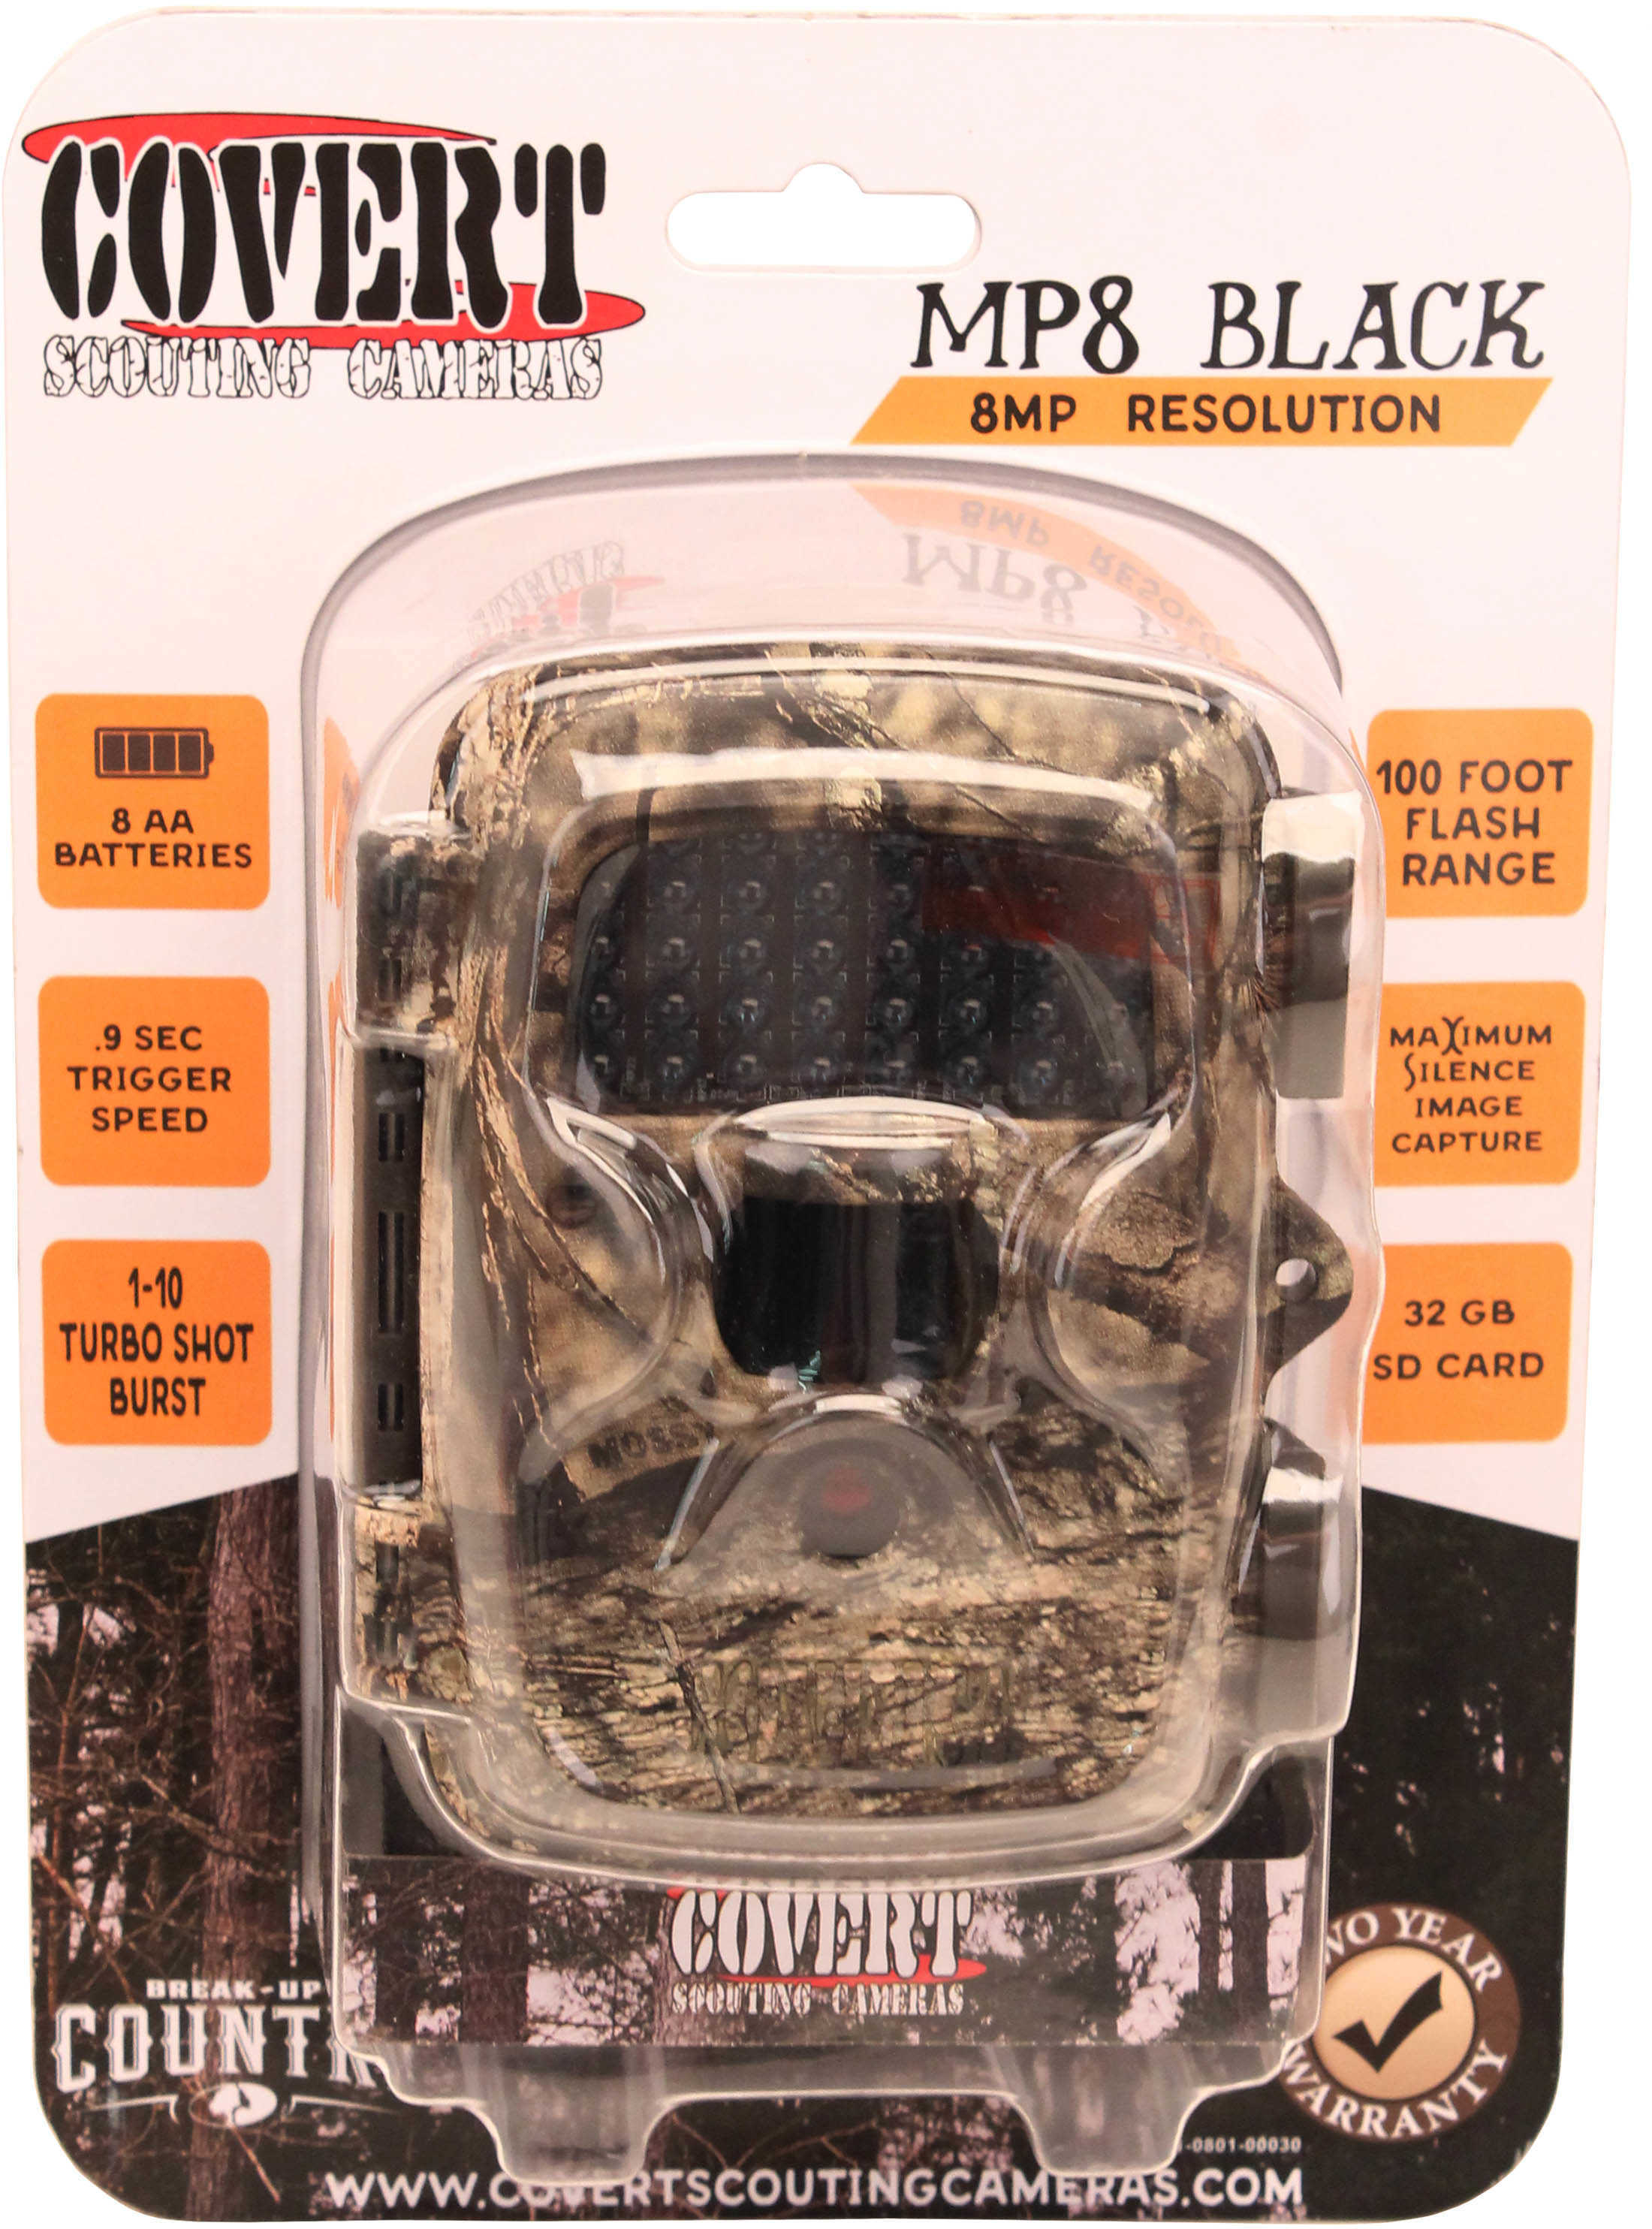 Covert Scouting Cameras MP8 Black , Mossy Oak Break-Up Country Md: 5212